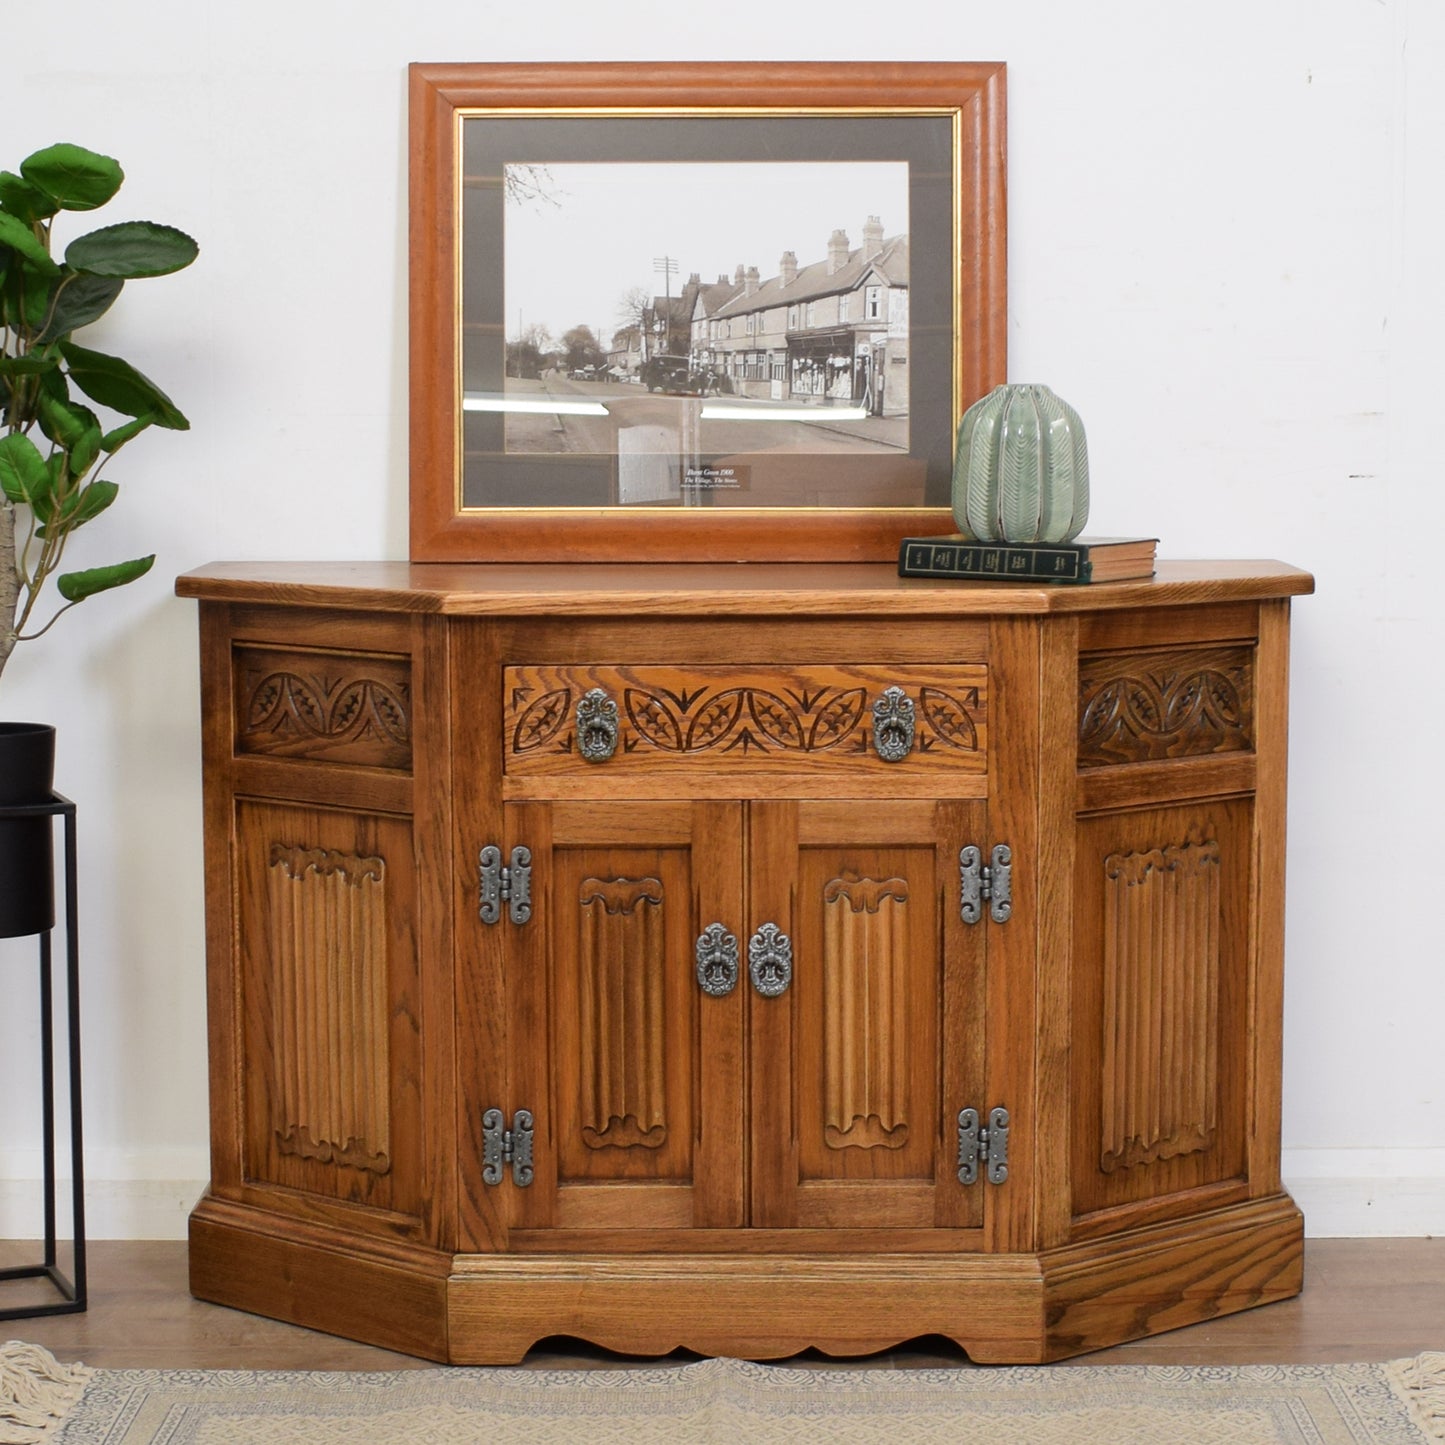 Restored Old Charm Hall Cabinet